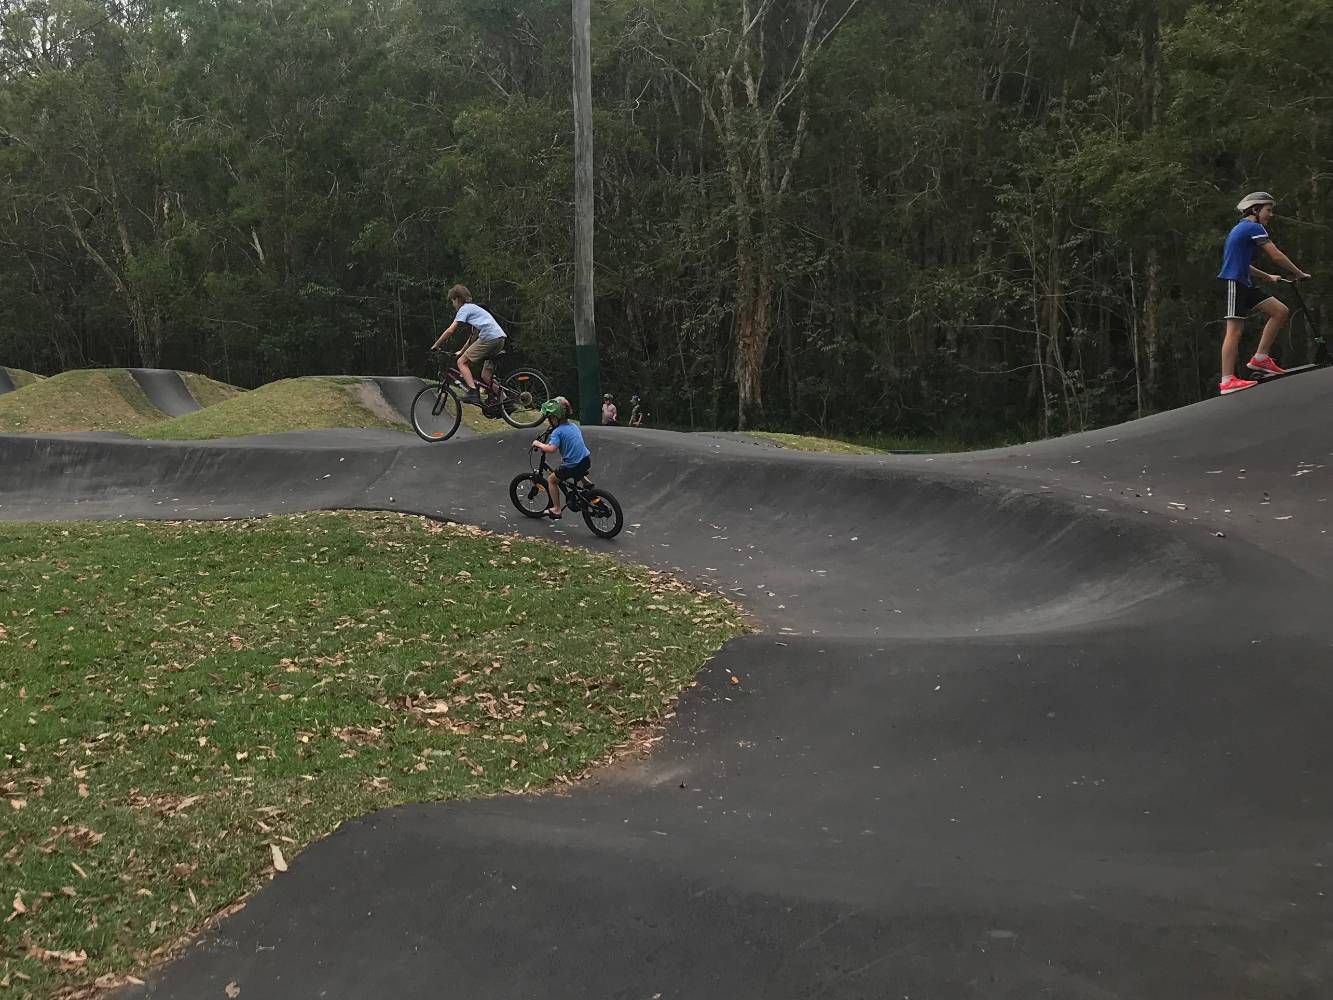 BMX bike and scooter track in park across the road.